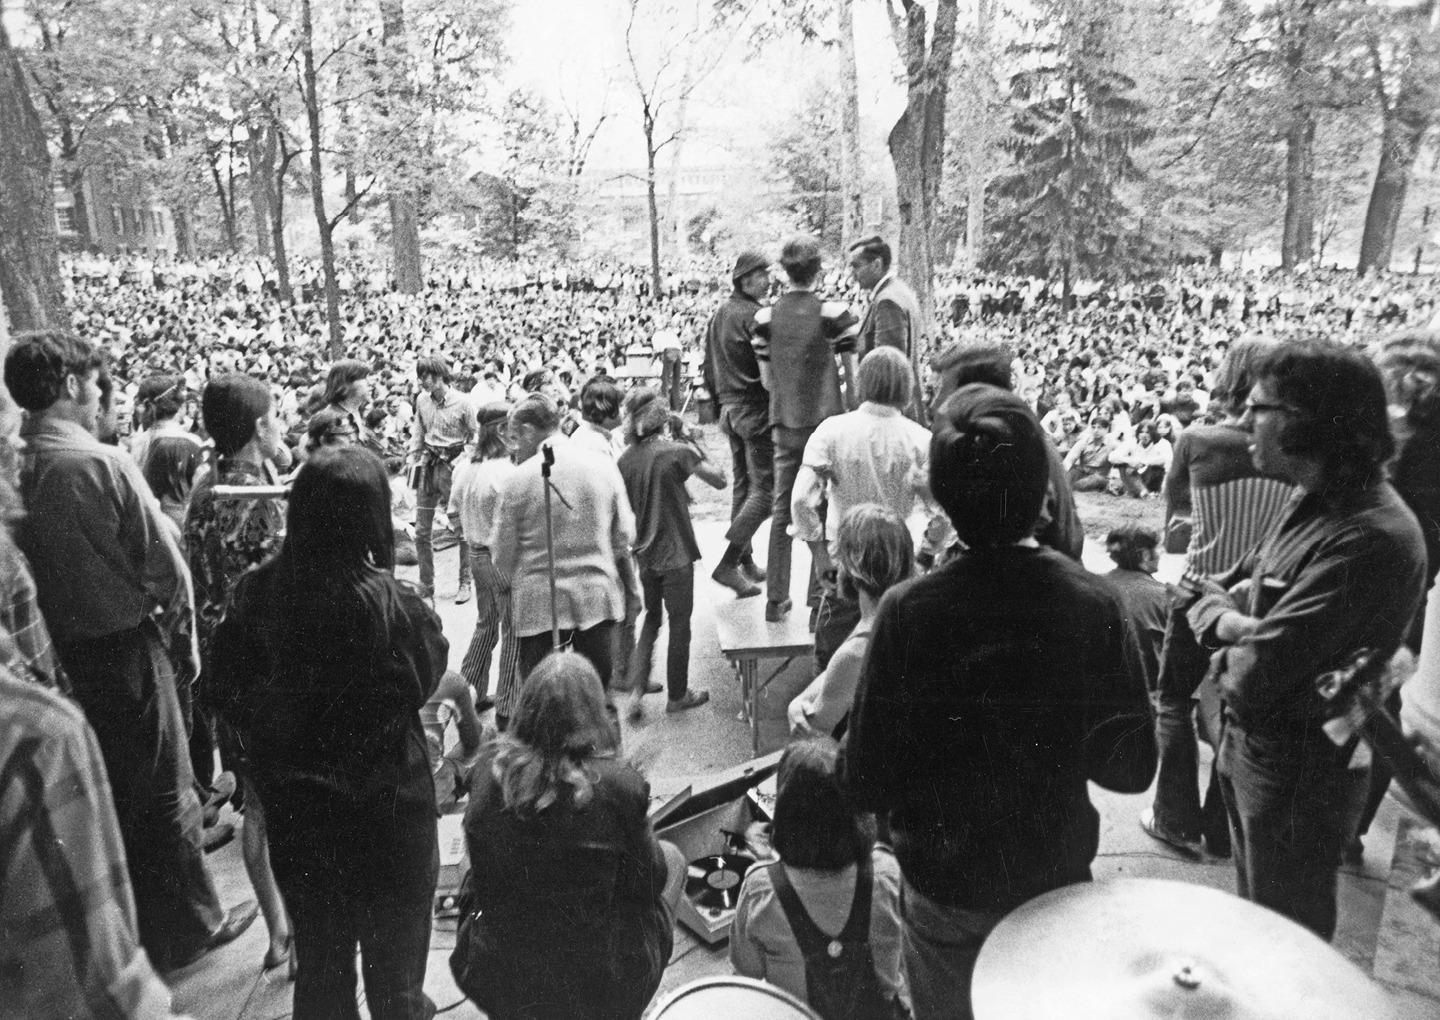 Many a student gathering – both in peace and protest – have taken place outside Templeton-Blackburn Alumni Memorial Auditorium. Photo courtesy of the Mahn Center for Archives and Special Collections